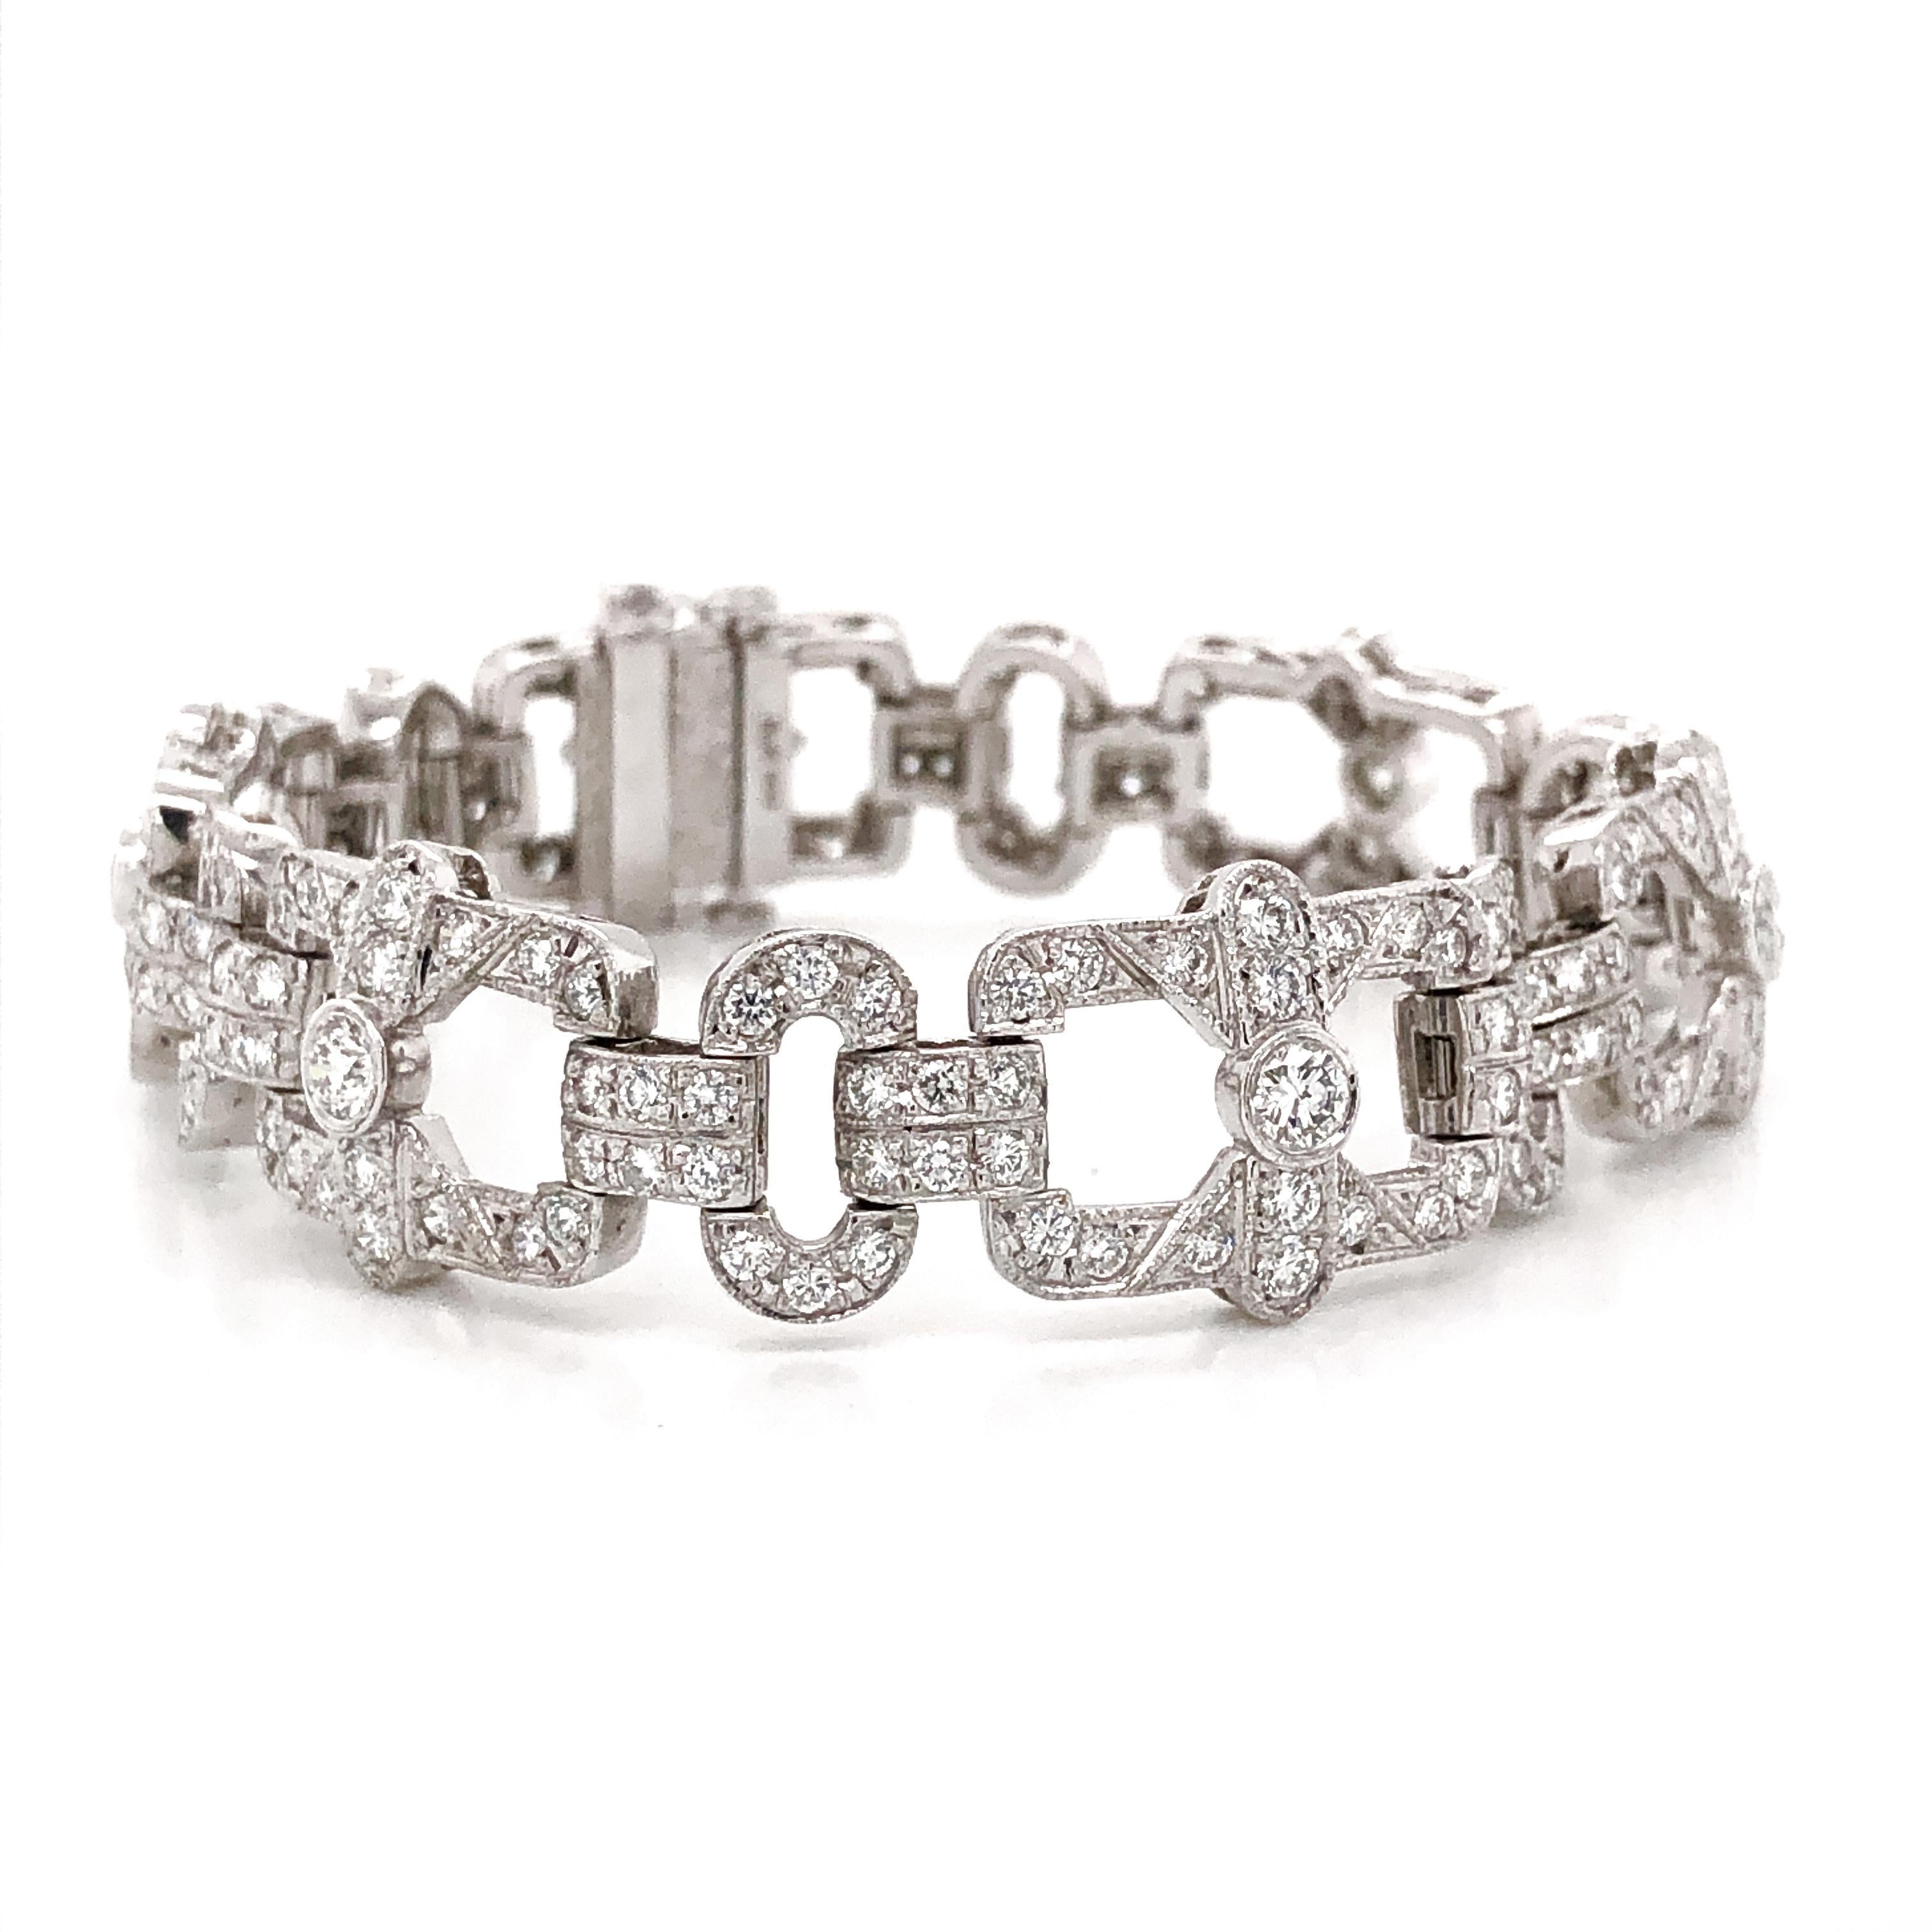 Art Deco Inspired Round Cut Diamonds 6.18 Carat Platinum Bracelet In New Condition For Sale In New York, NY